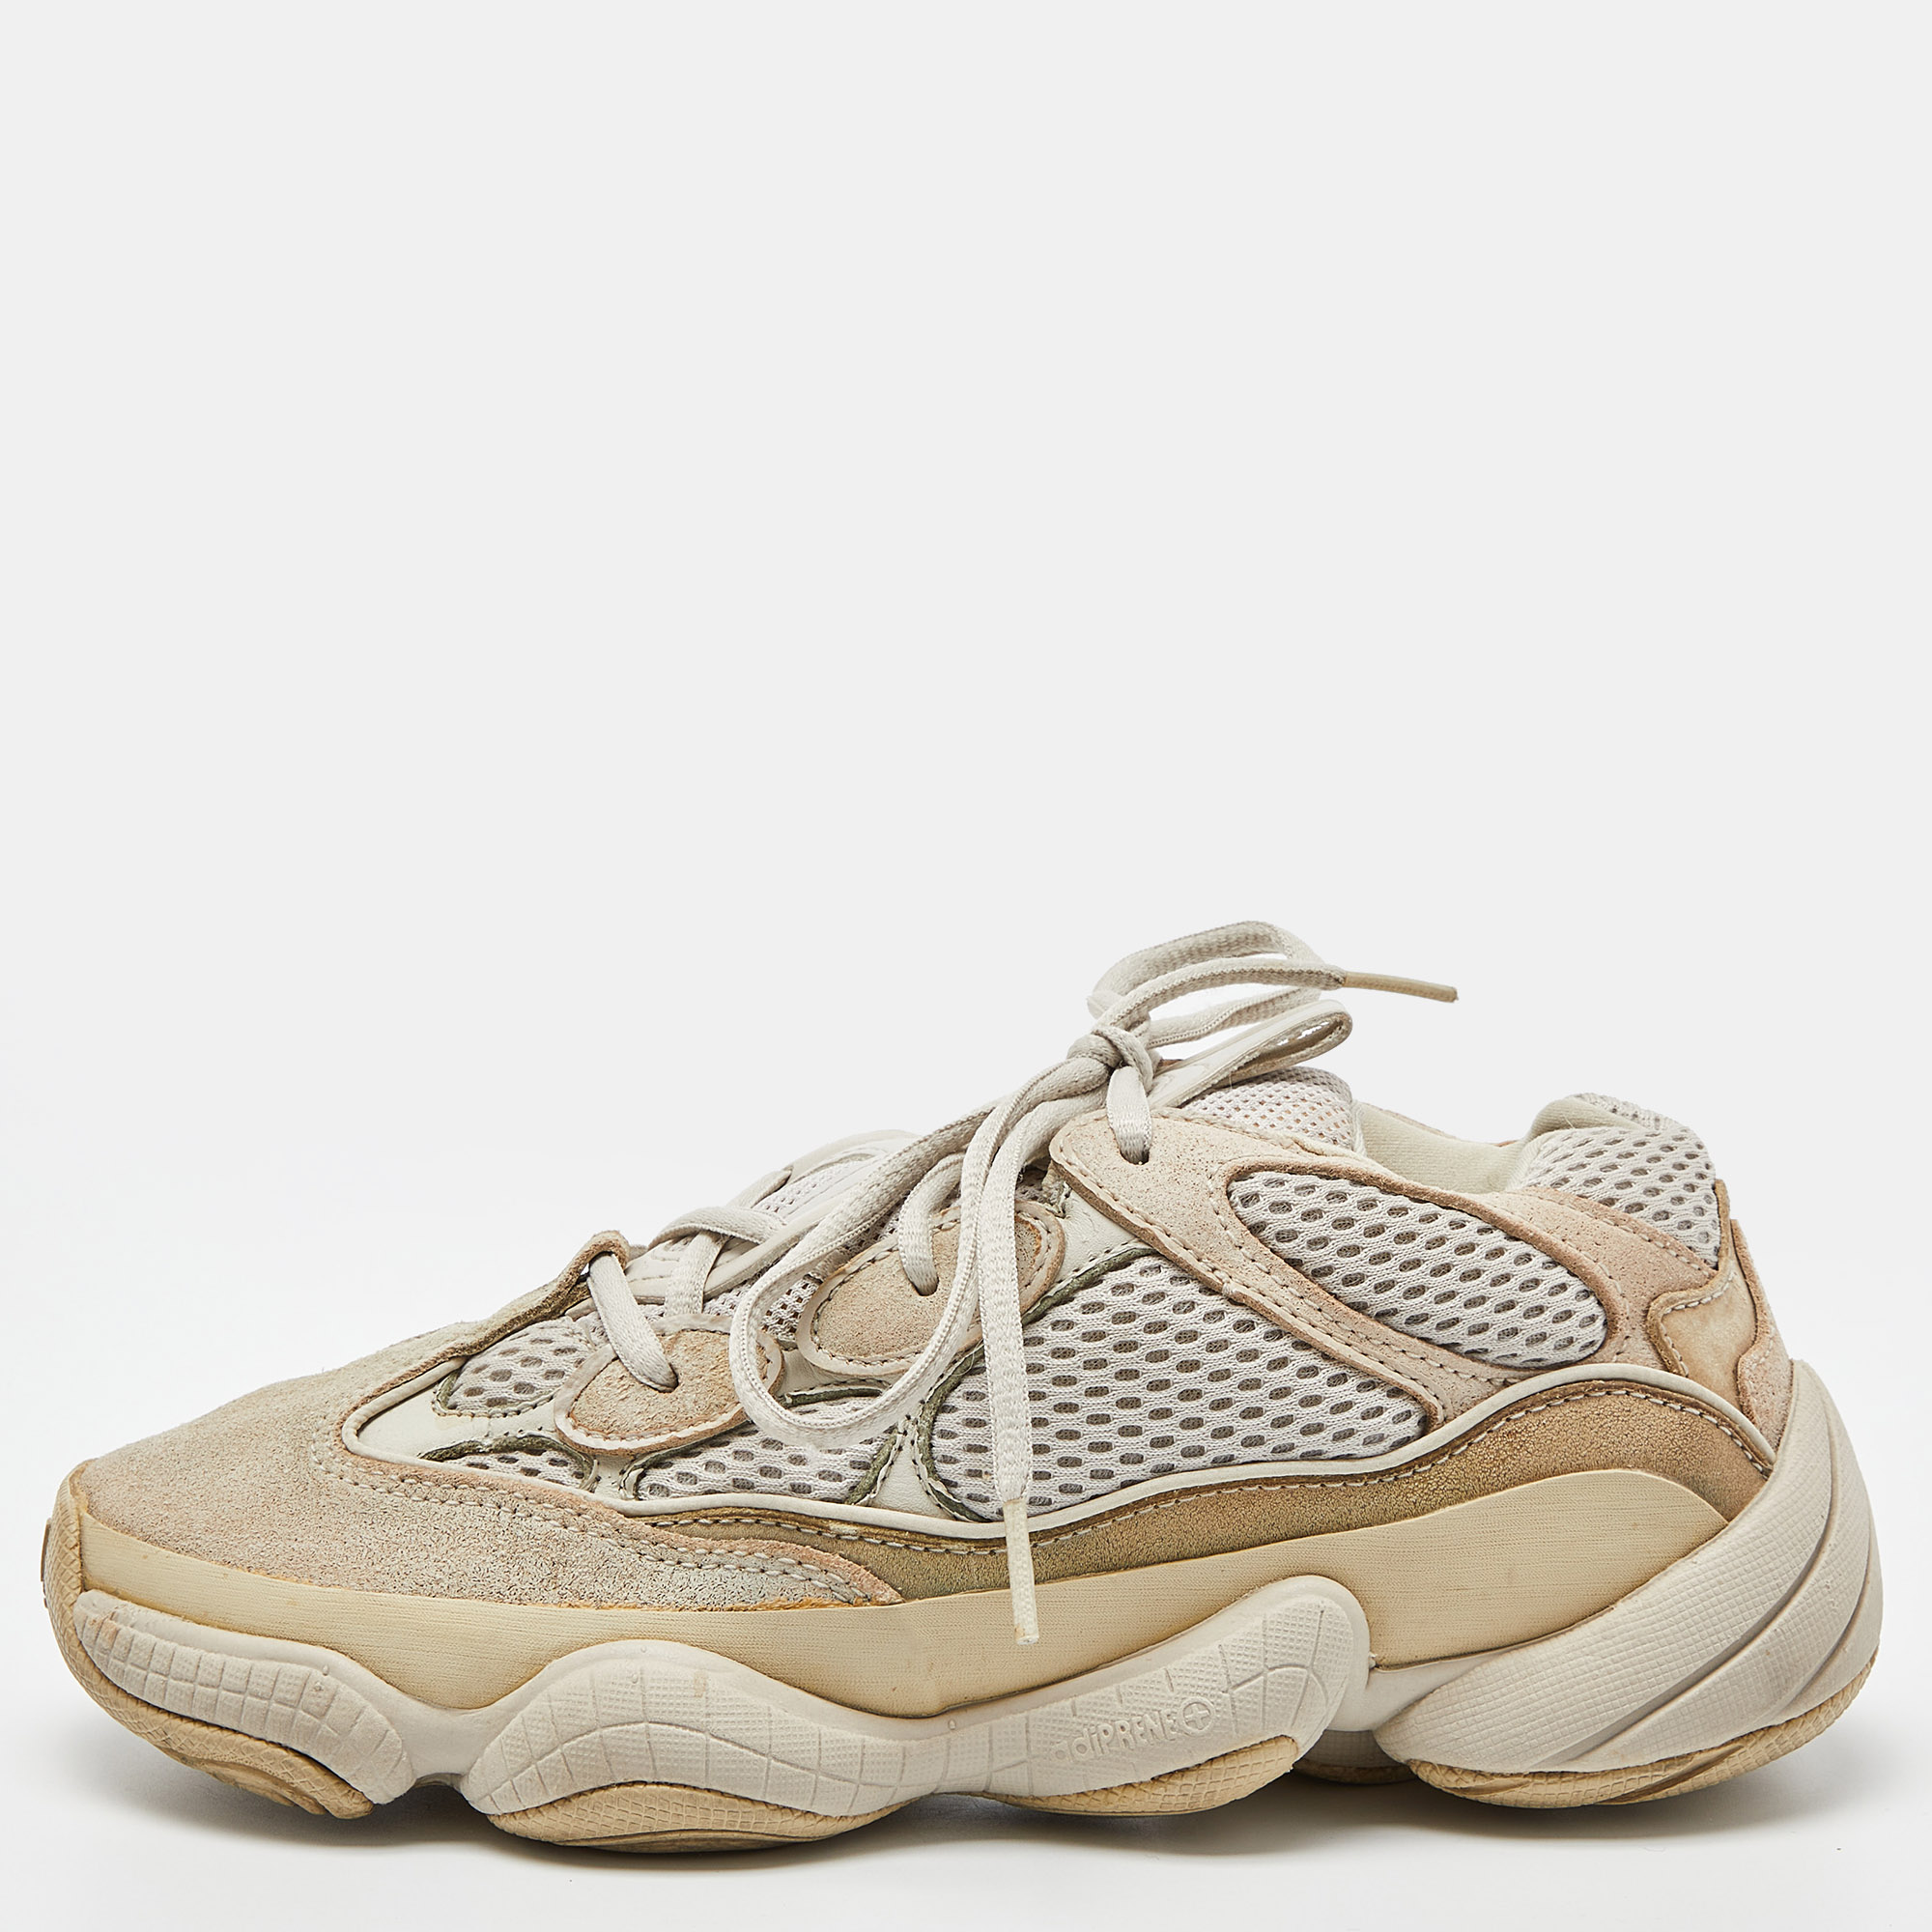 

Yeezy x Adidas Cream Suede and Mesh Yeezy 500 Blush Sneakers Size 38 2/3, Grey